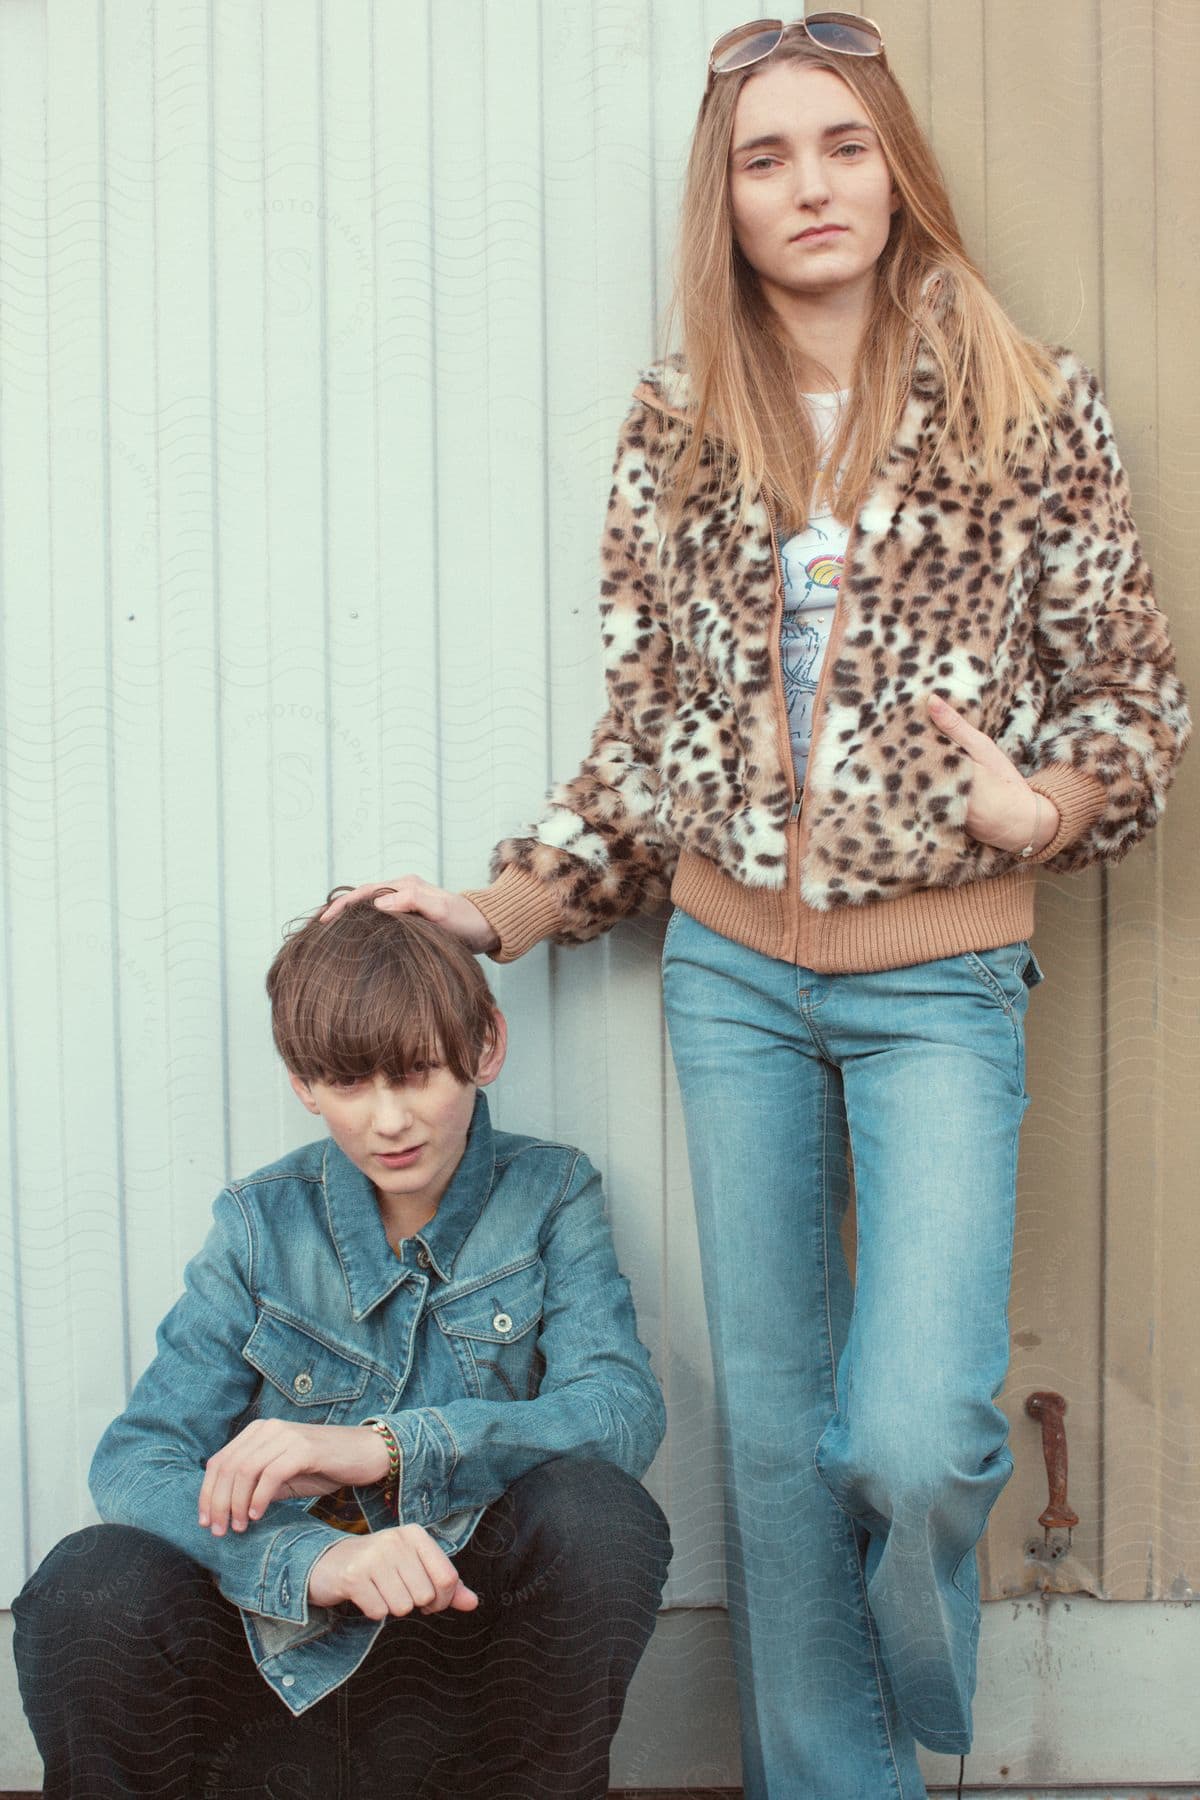 Teenage girl modeling animal print jacket and blue jeans standing against panel siding building with male teenage model beside in blue jean jacket